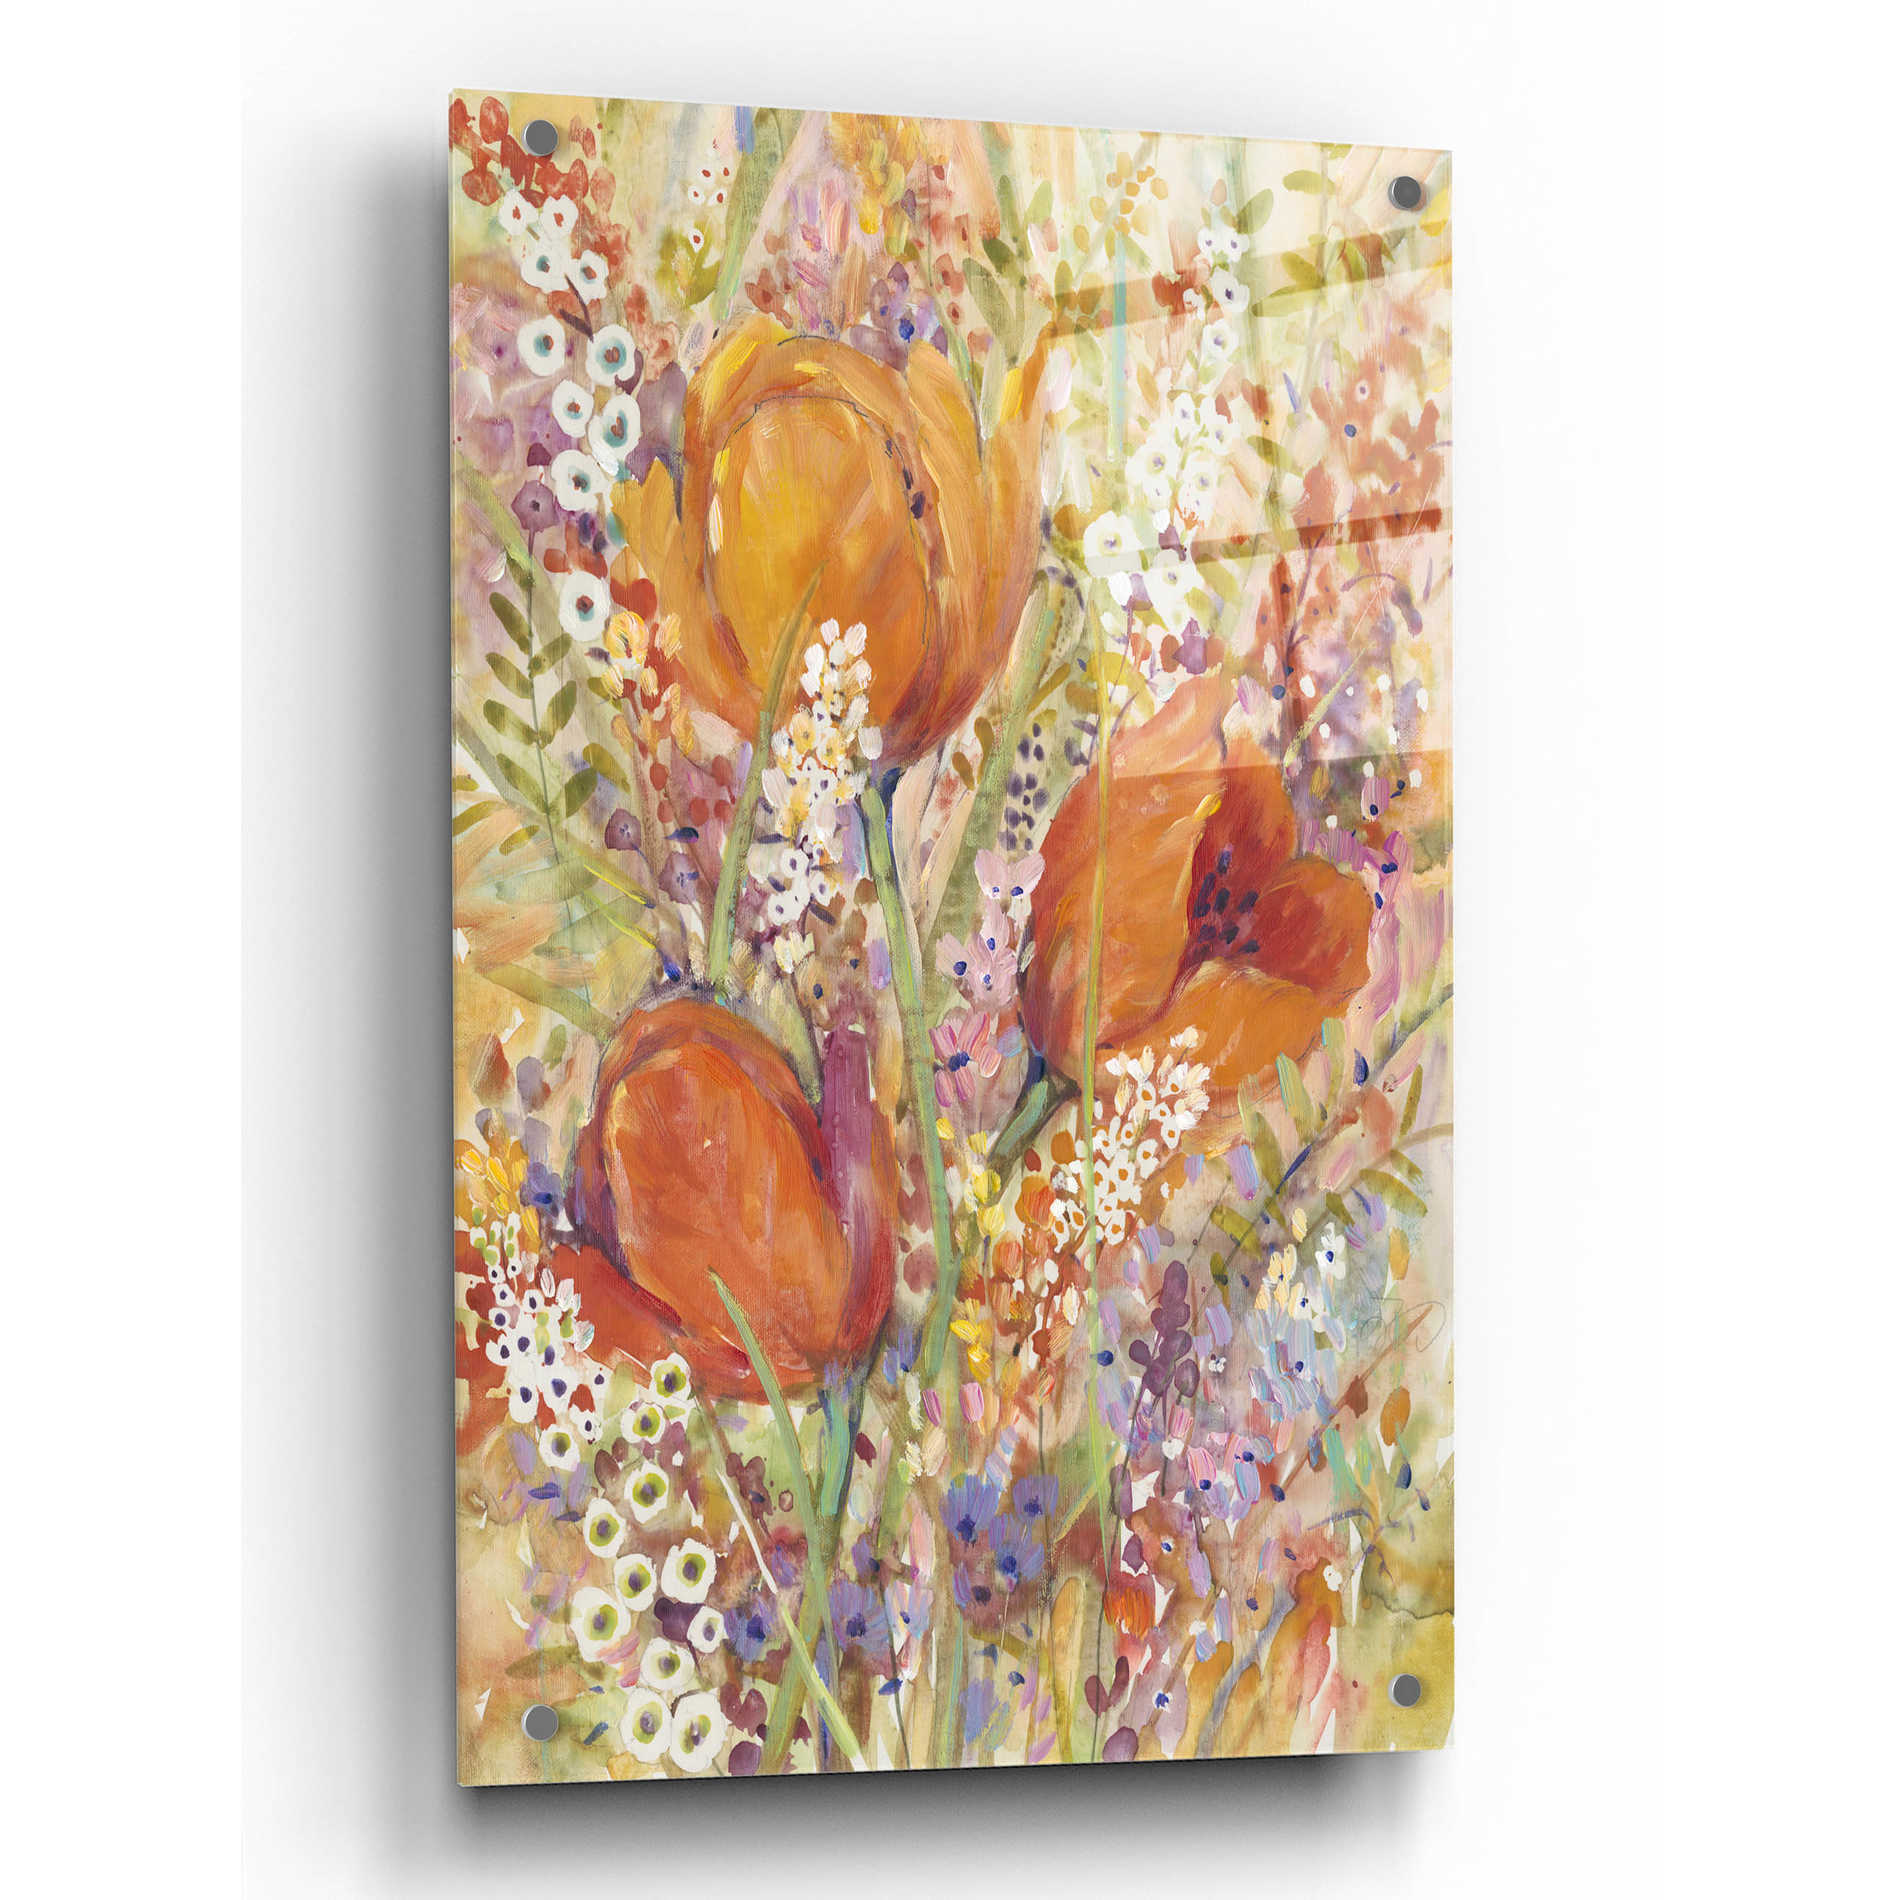 Epic Art 'Spring Bloom I' by Tim O'Toole, Acrylic Glass Wall Art,24x36